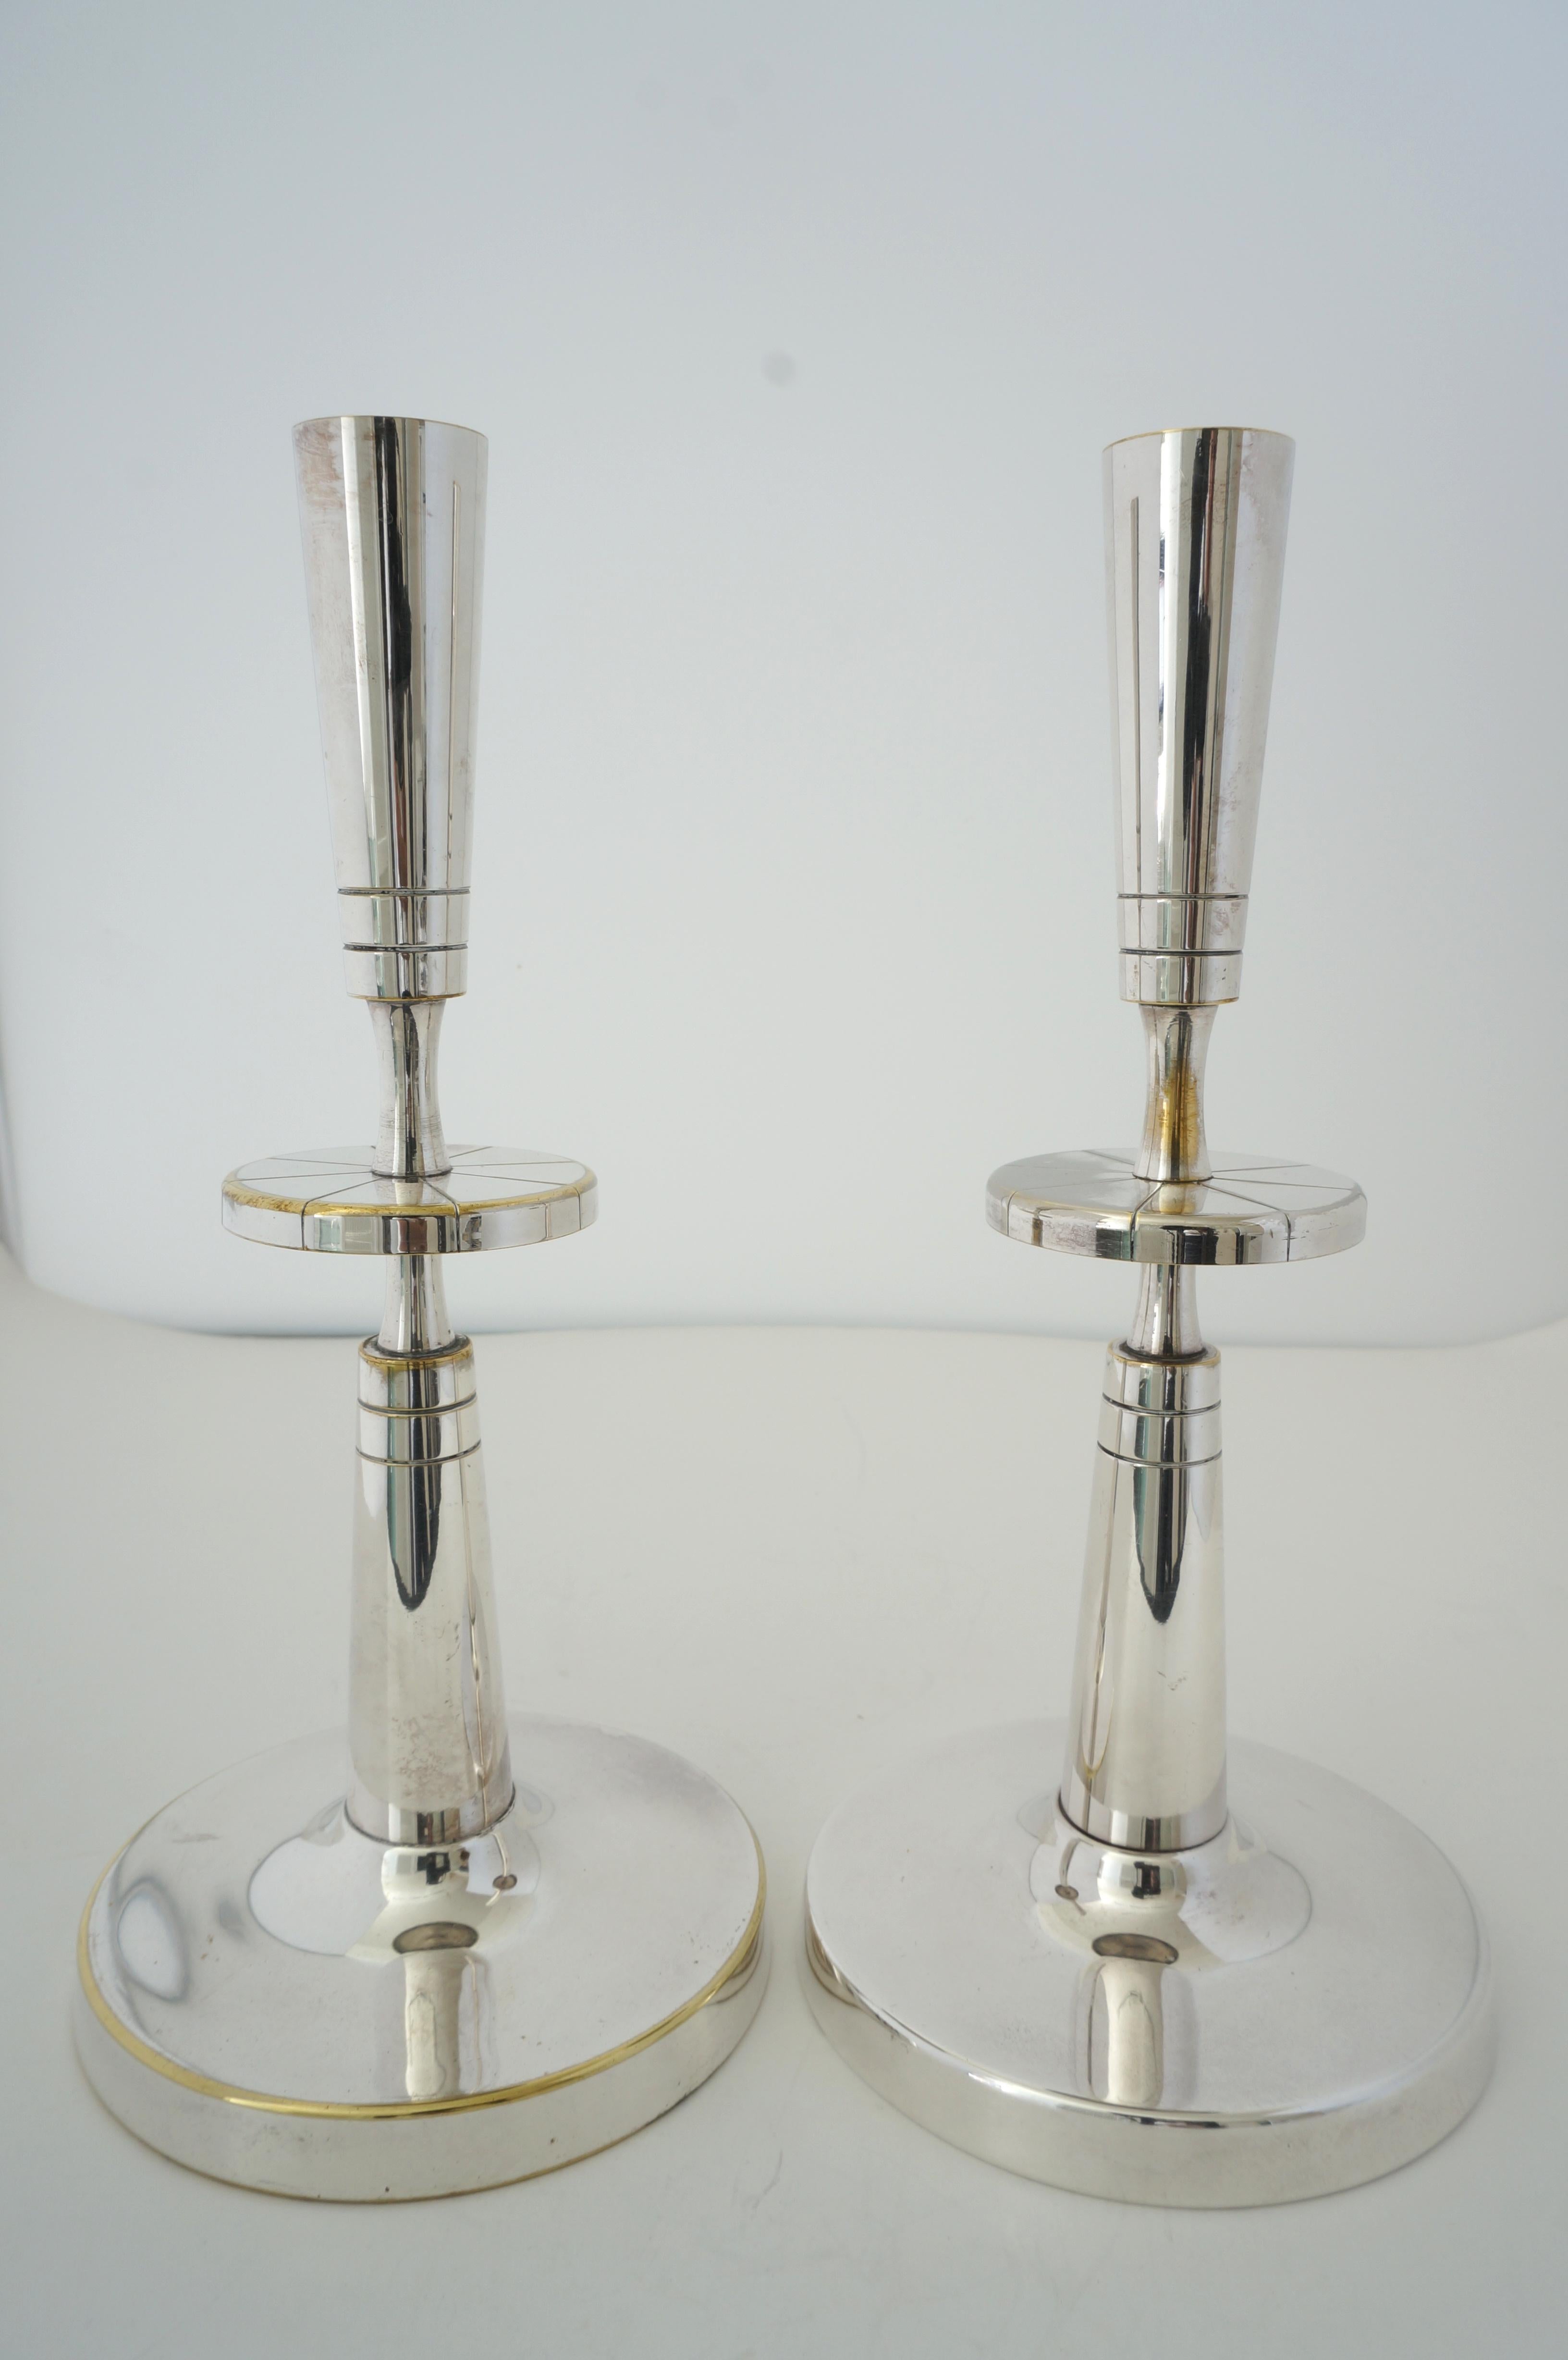 Molded Pair of Silverplate Candlesticks by Tommi Parzinger for Mueck-Cary